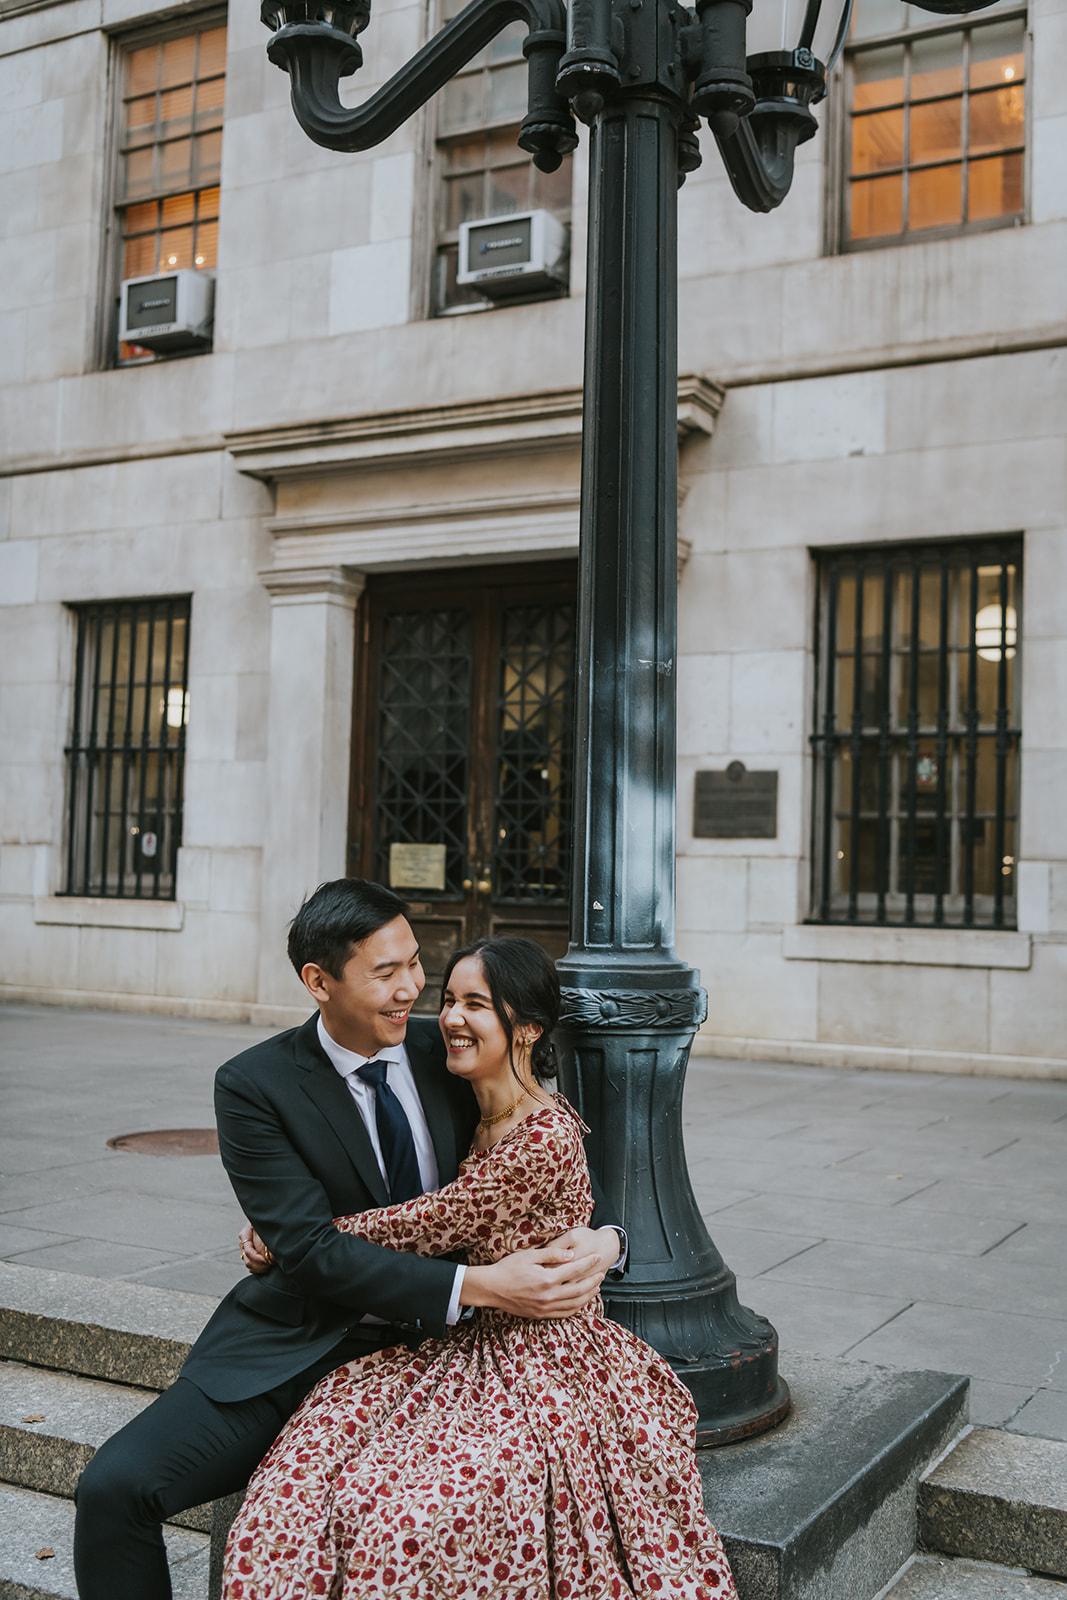 Brooklyn City Hall Elopement with photos at Brooklyn Heights Promenade, L'Apartment 4F, and Joe's Coffee